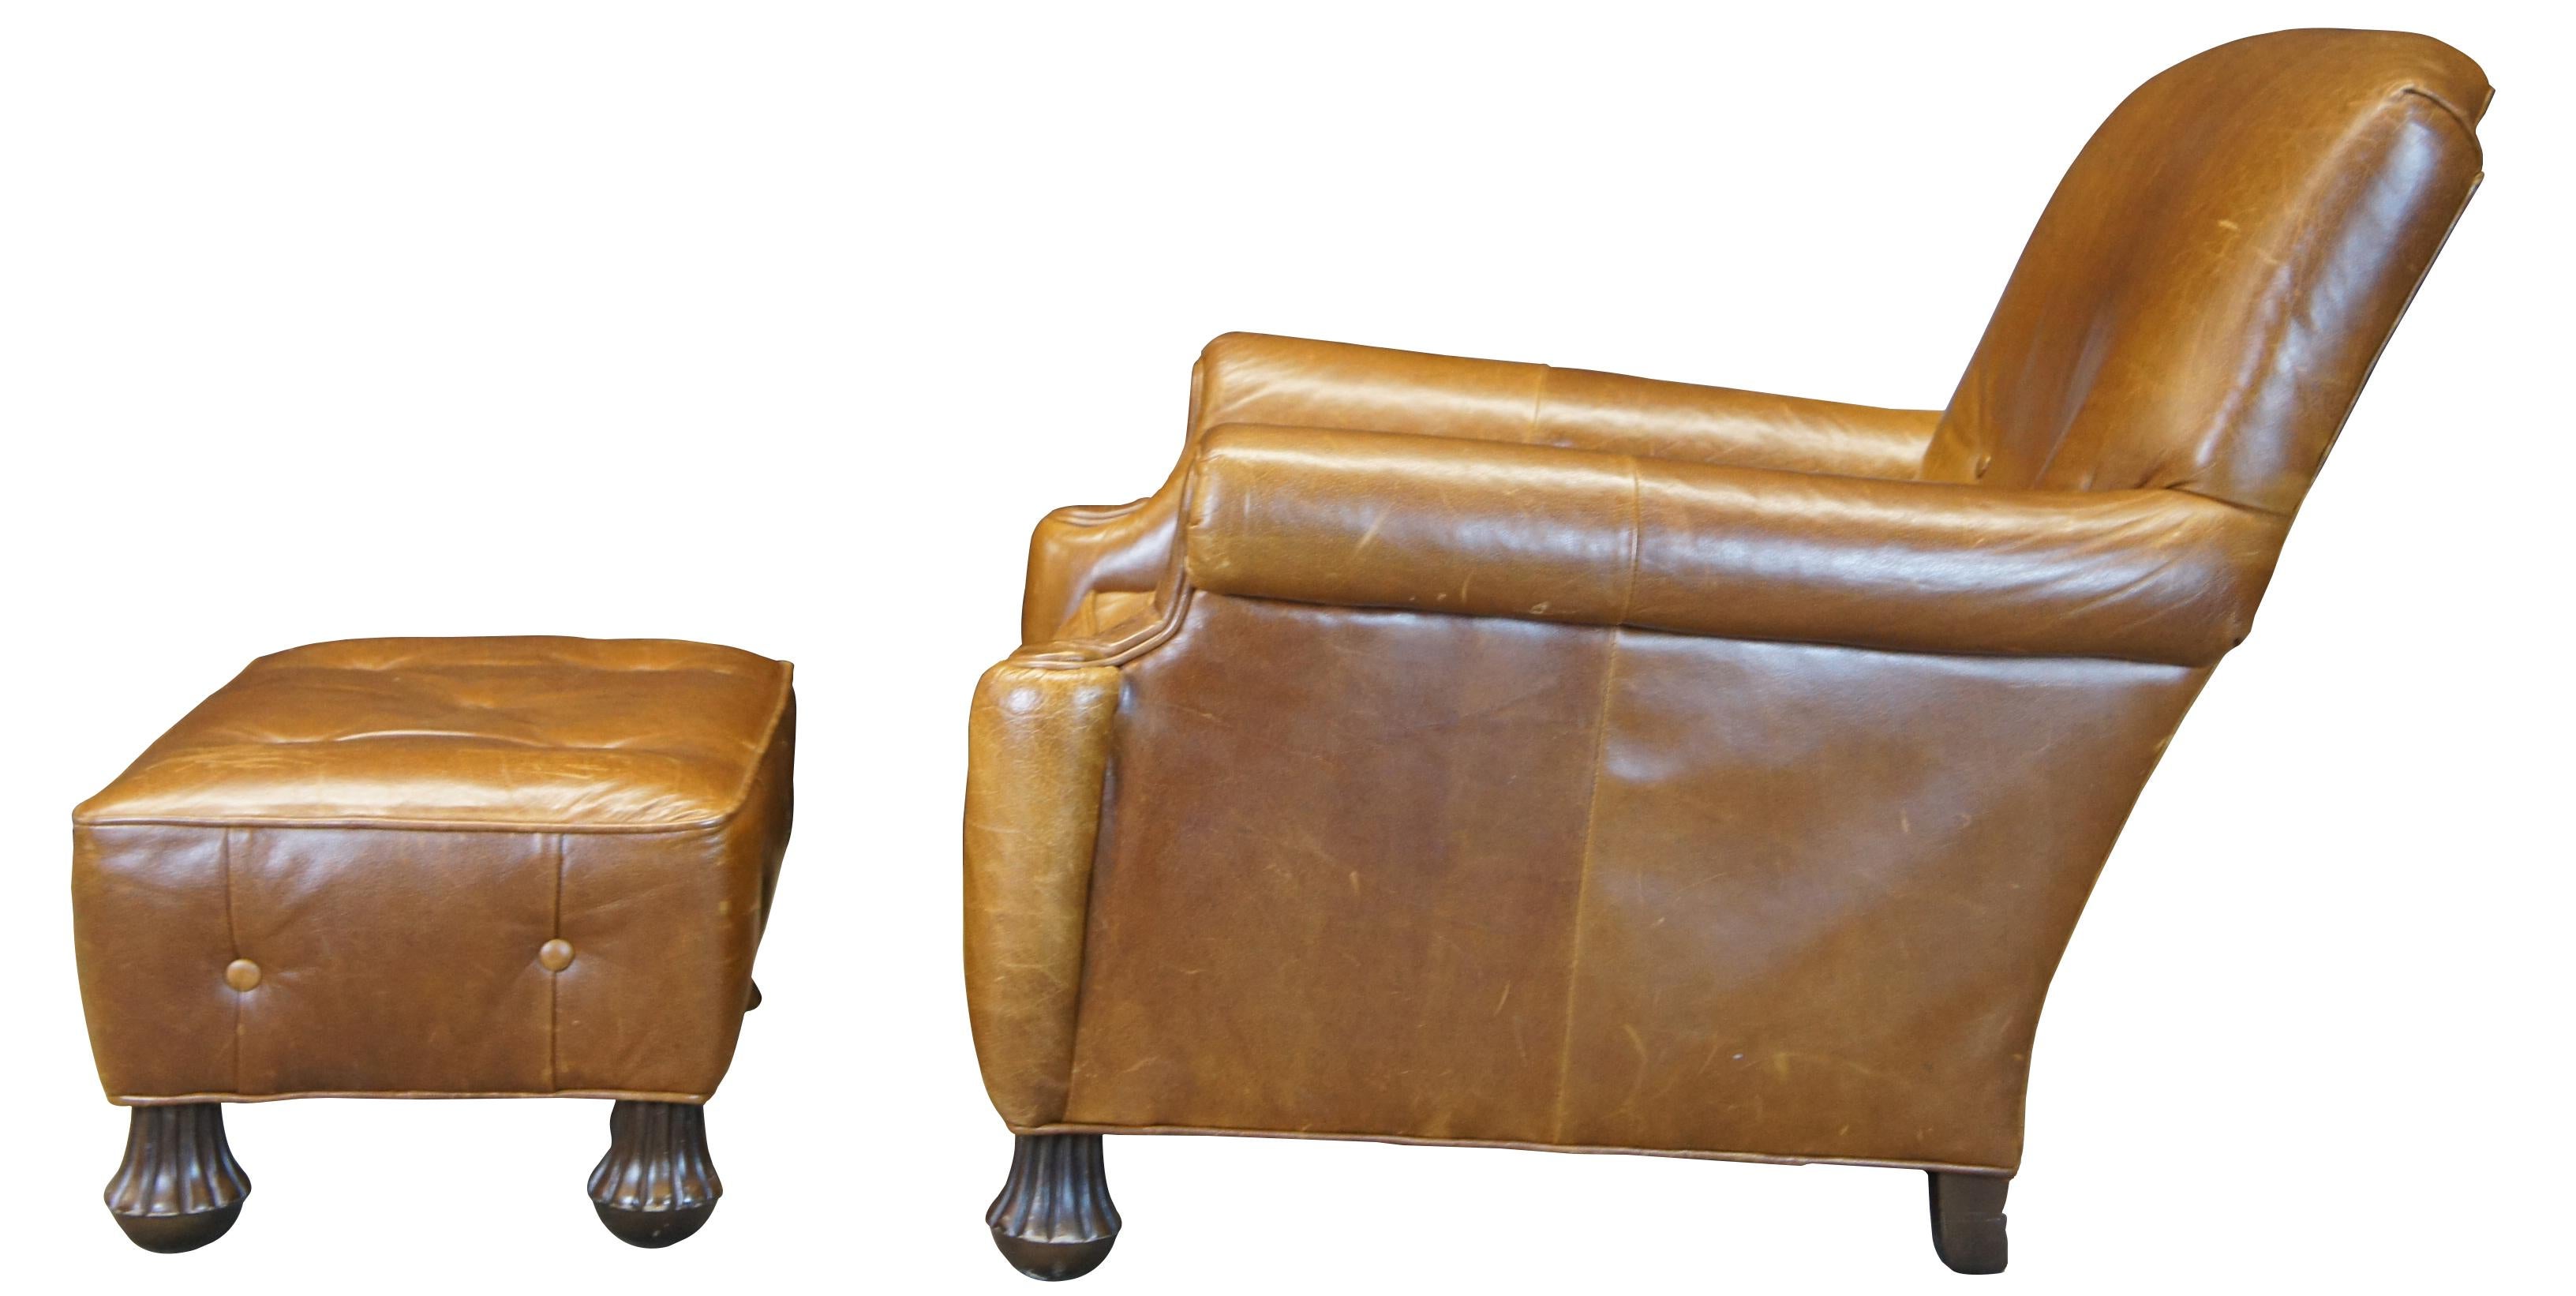 William Alan Inc brown leather club chair, circa 1999 Features a down cushion, rolled arms, tufted seat and ottoman and bun feet.

William Alan is based out of High Point, NC. They specialize in building custom furniture and have been in business